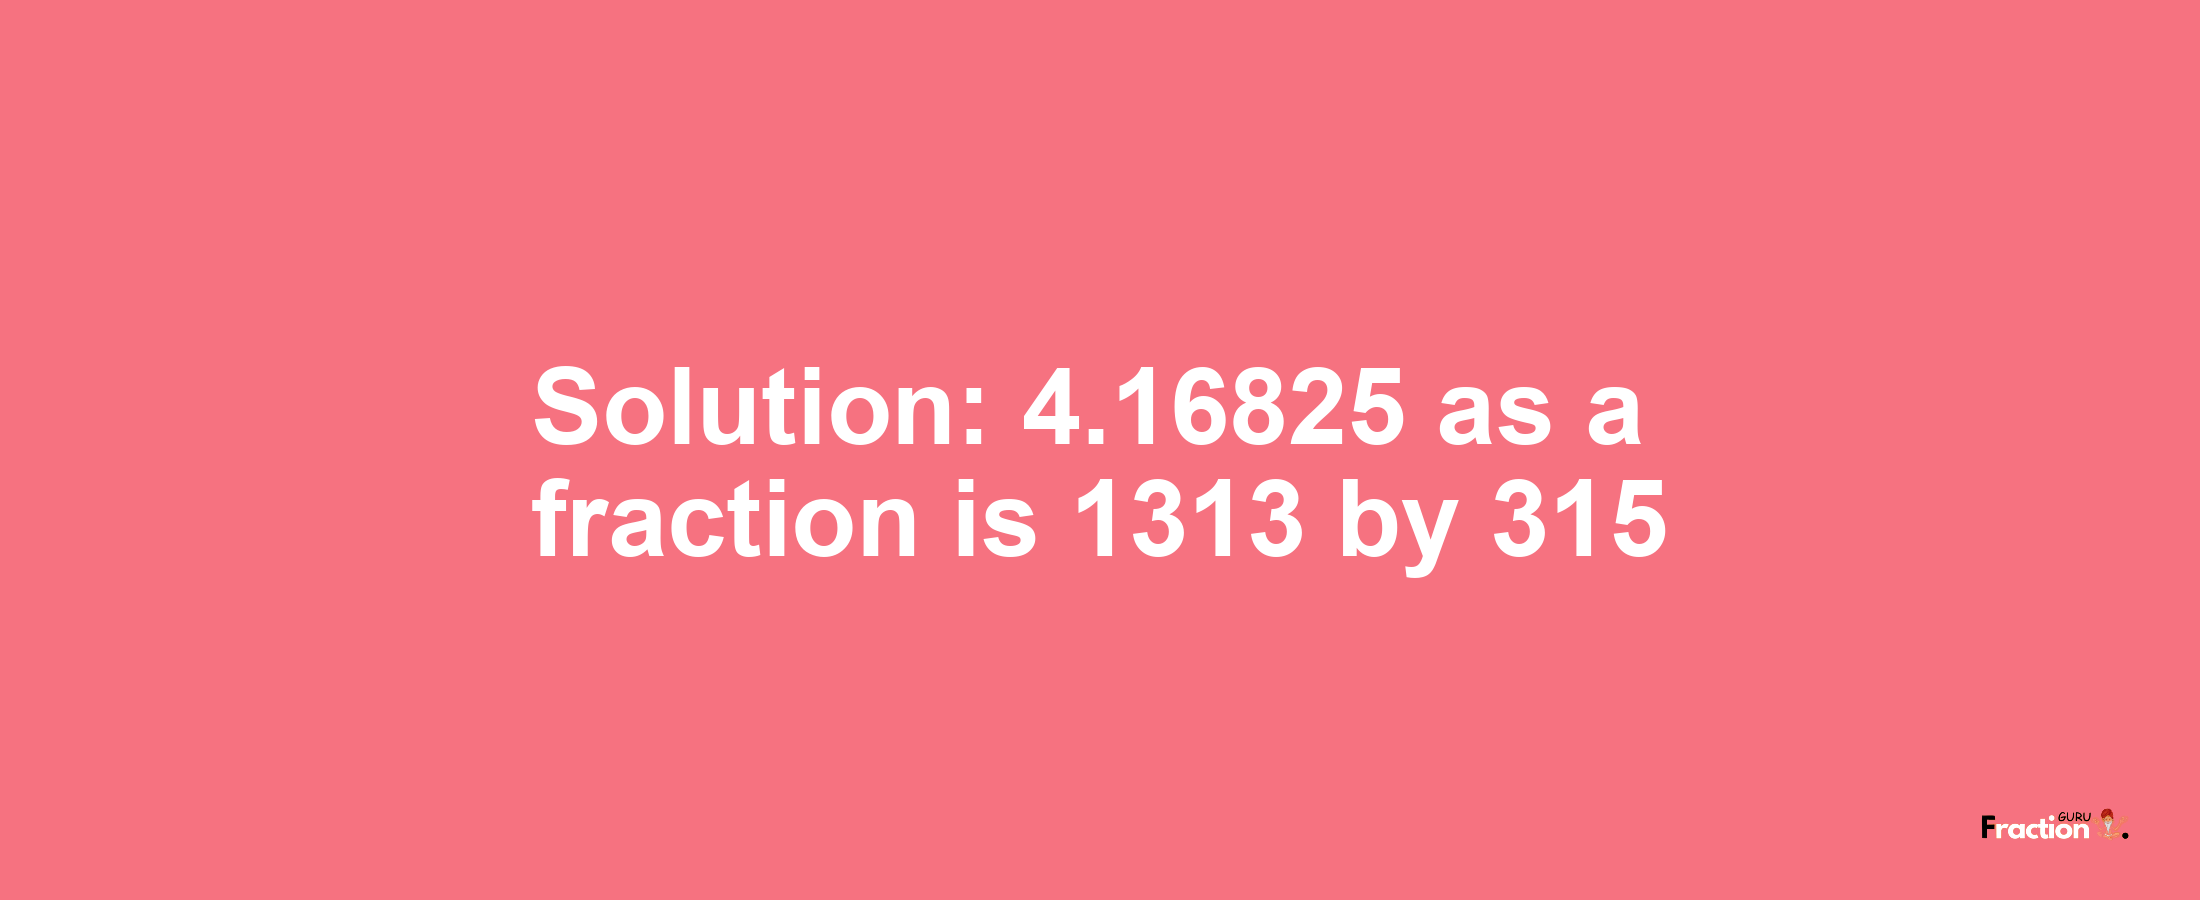 Solution:4.16825 as a fraction is 1313/315